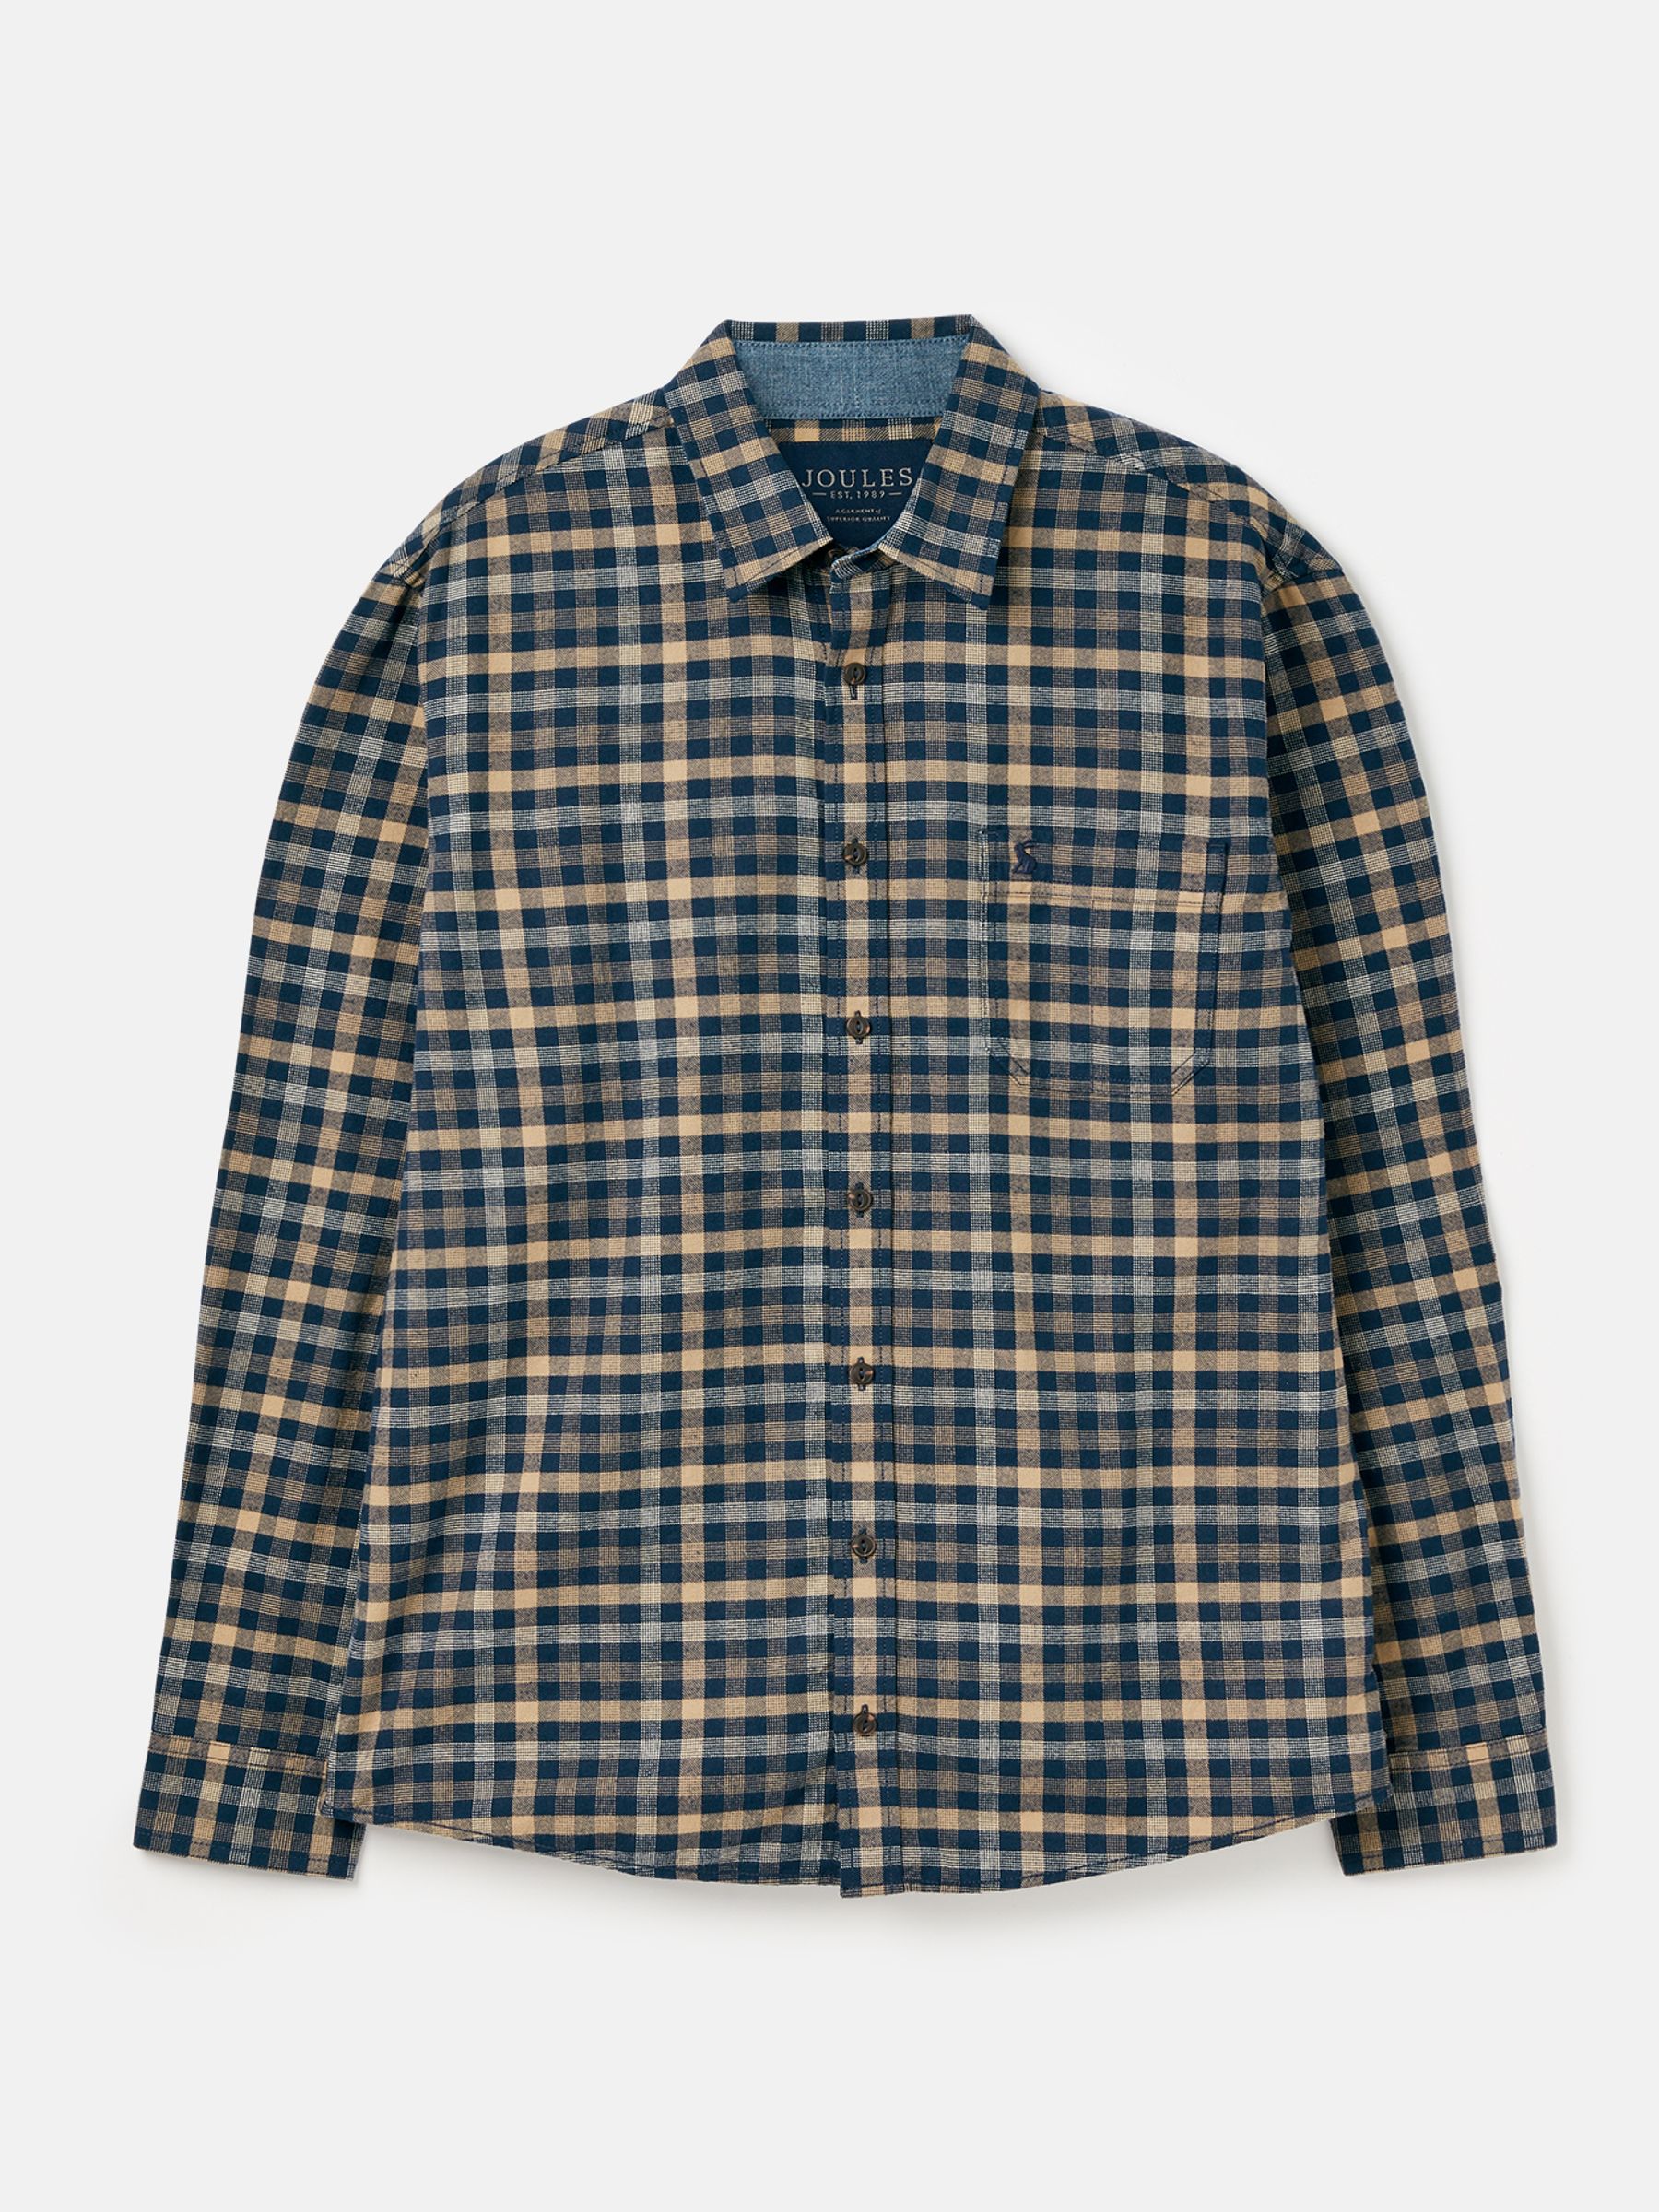 Buy Buchannan Blue Check Shirt from the Joules online shop